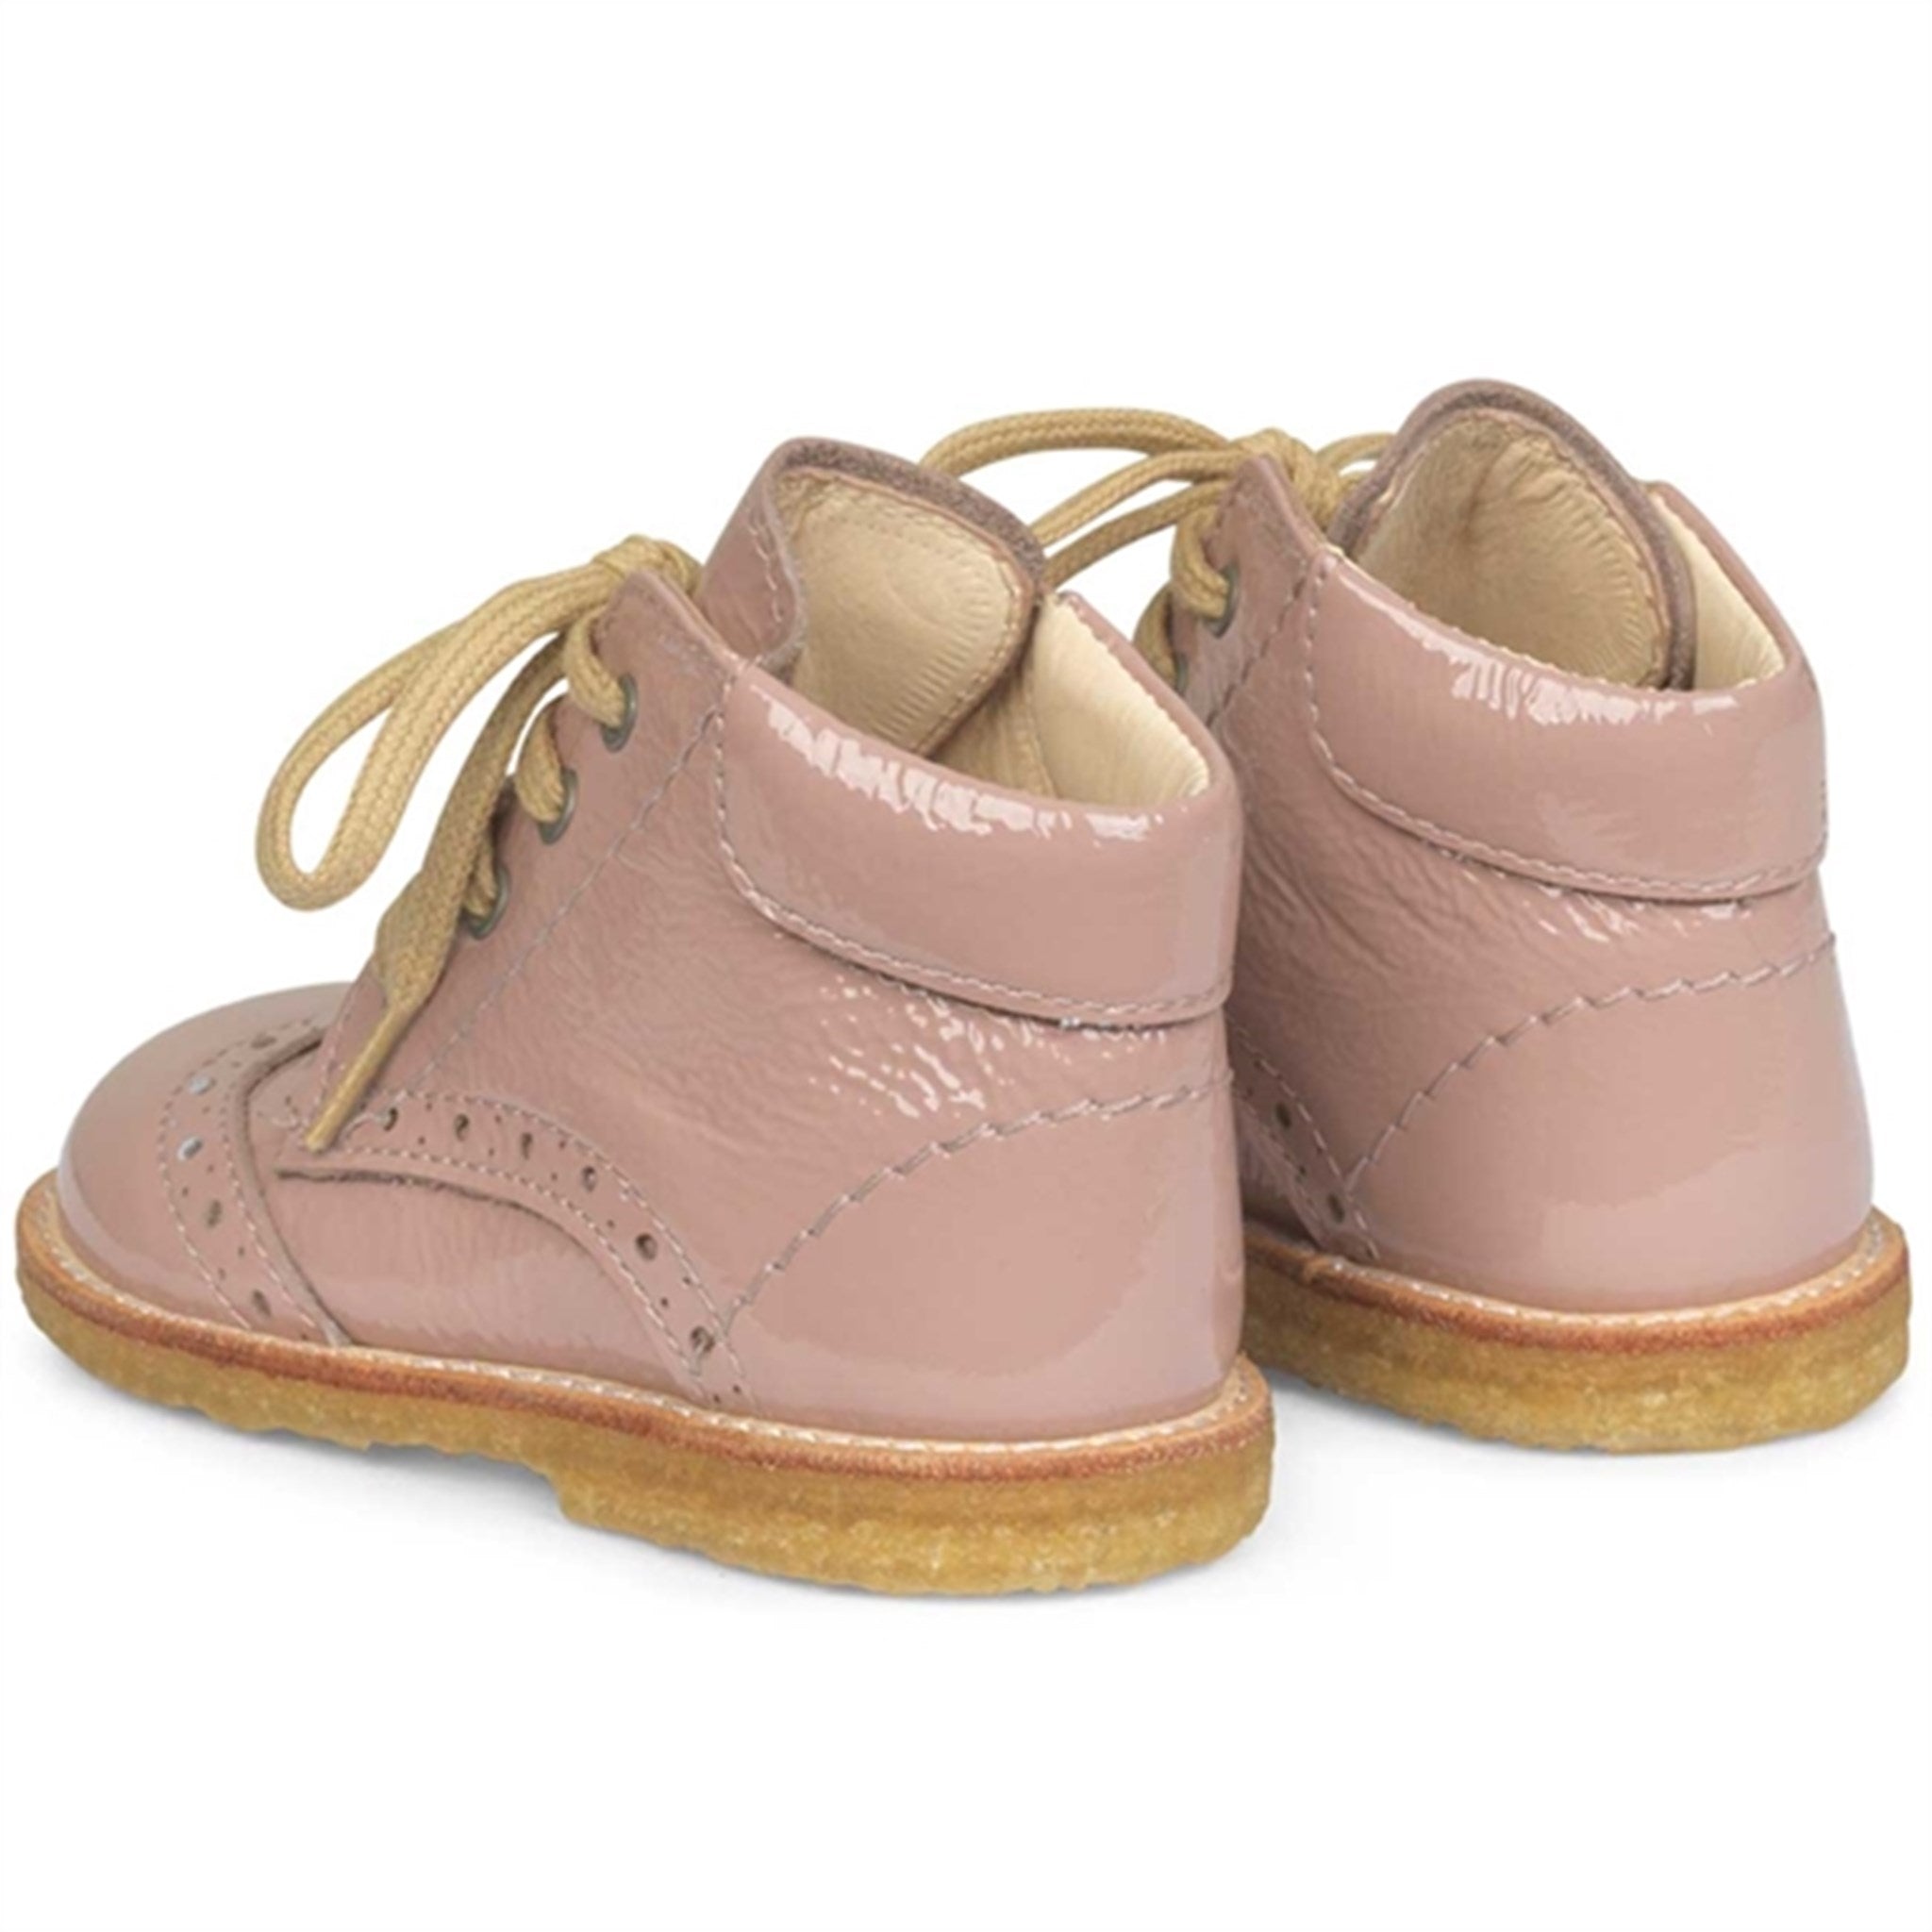 Angulus Beginner Shoes w. Lace Rosa 2378-101-1387 2